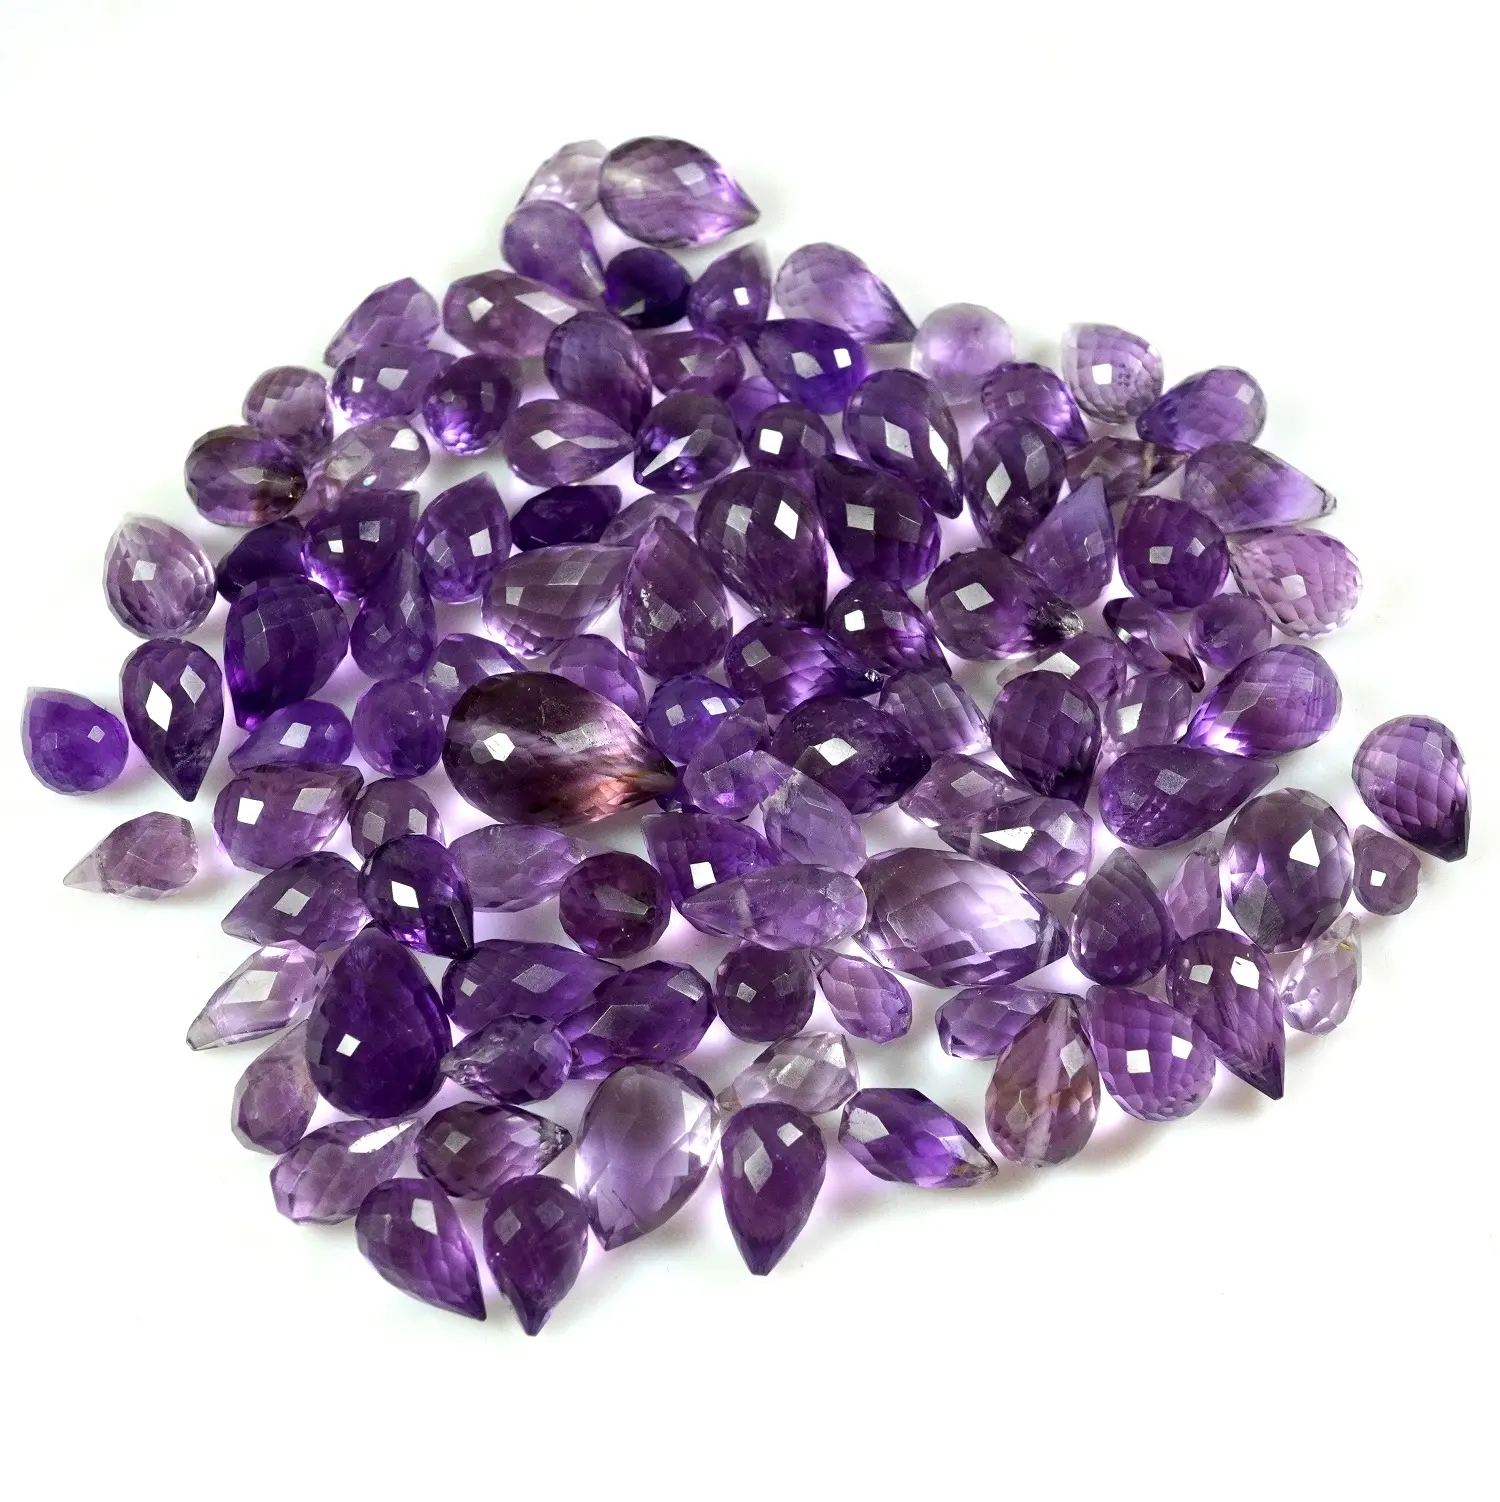 Premium Quality Natural Amethyst Cut Drops Drilling Loose Gemstone 7/ 11 MM Size available at Reasonable Price